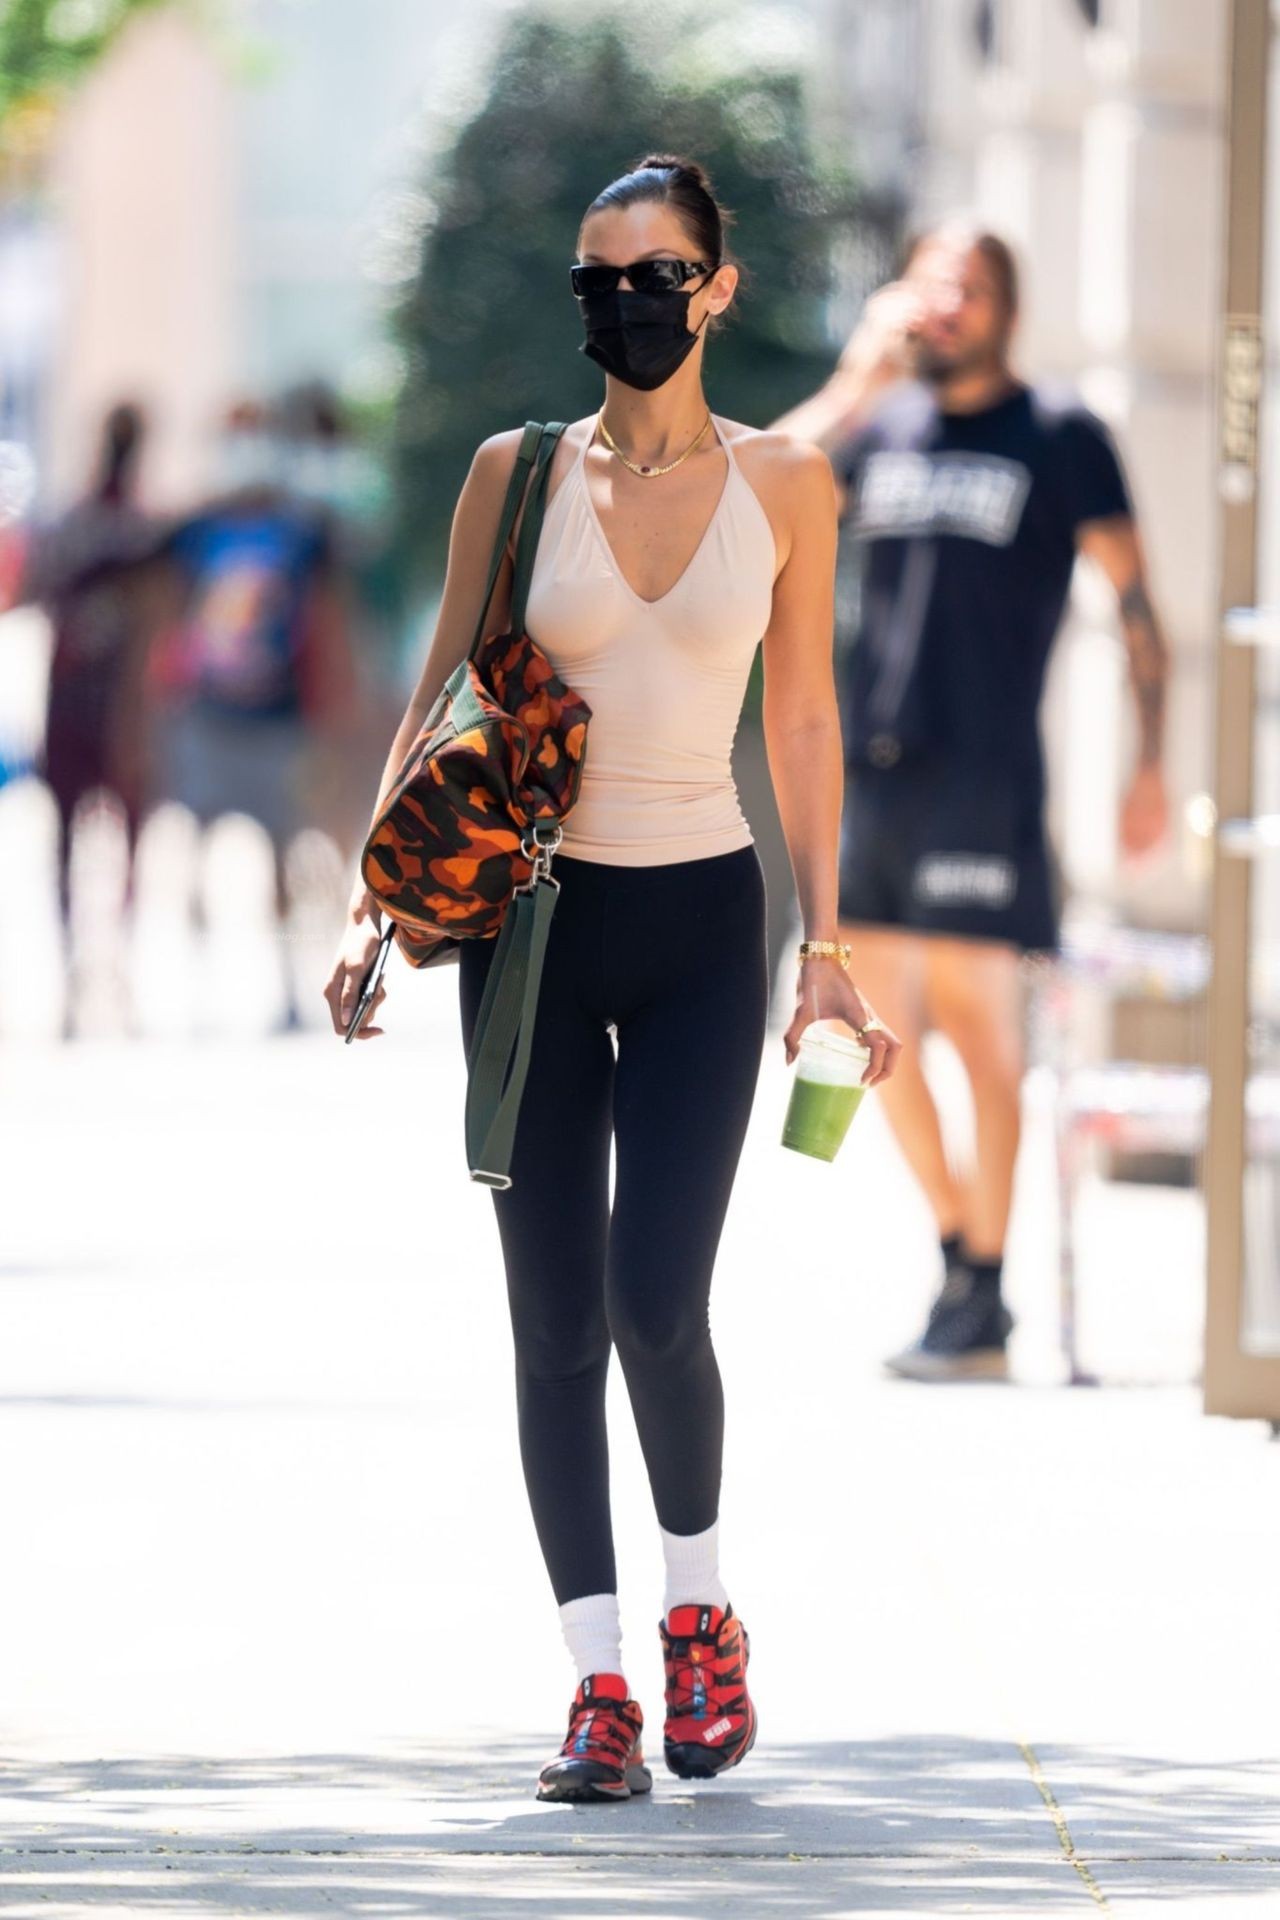 Braless Bella Hadid is Spotted Going to the Gym in NYC (32 Phot
os)